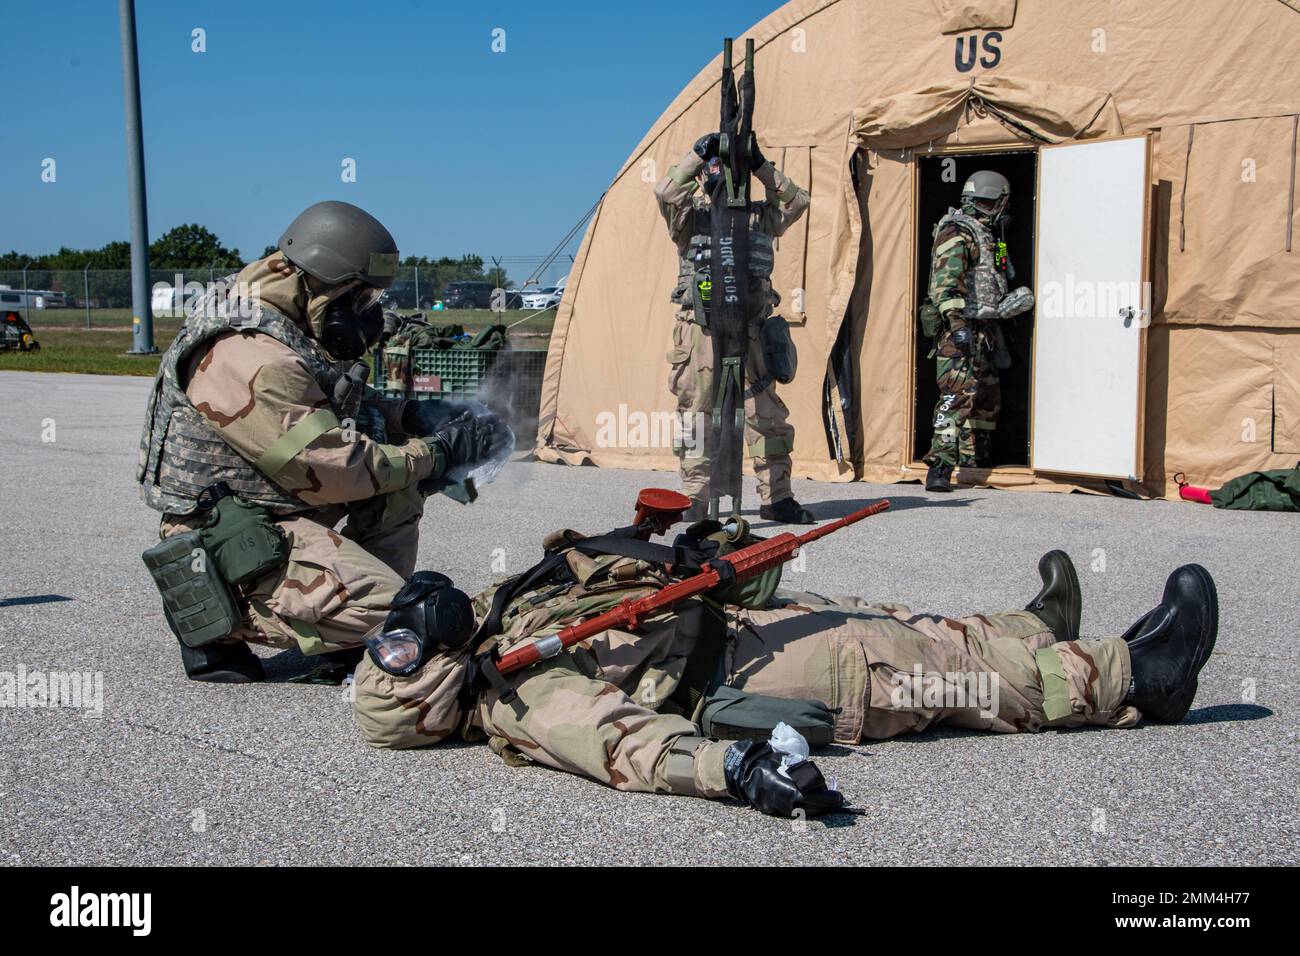 U.S. Air Force Airmen decontaminates a simulated casualty during a Chemical, Biological, Radiological, Nuclear exercise at Whiteman Air Force Base, Missouri, Sept. 14, 2022. Airmen train on how to treat CBRN related casualties to ensure mission readiness. Stock Photo